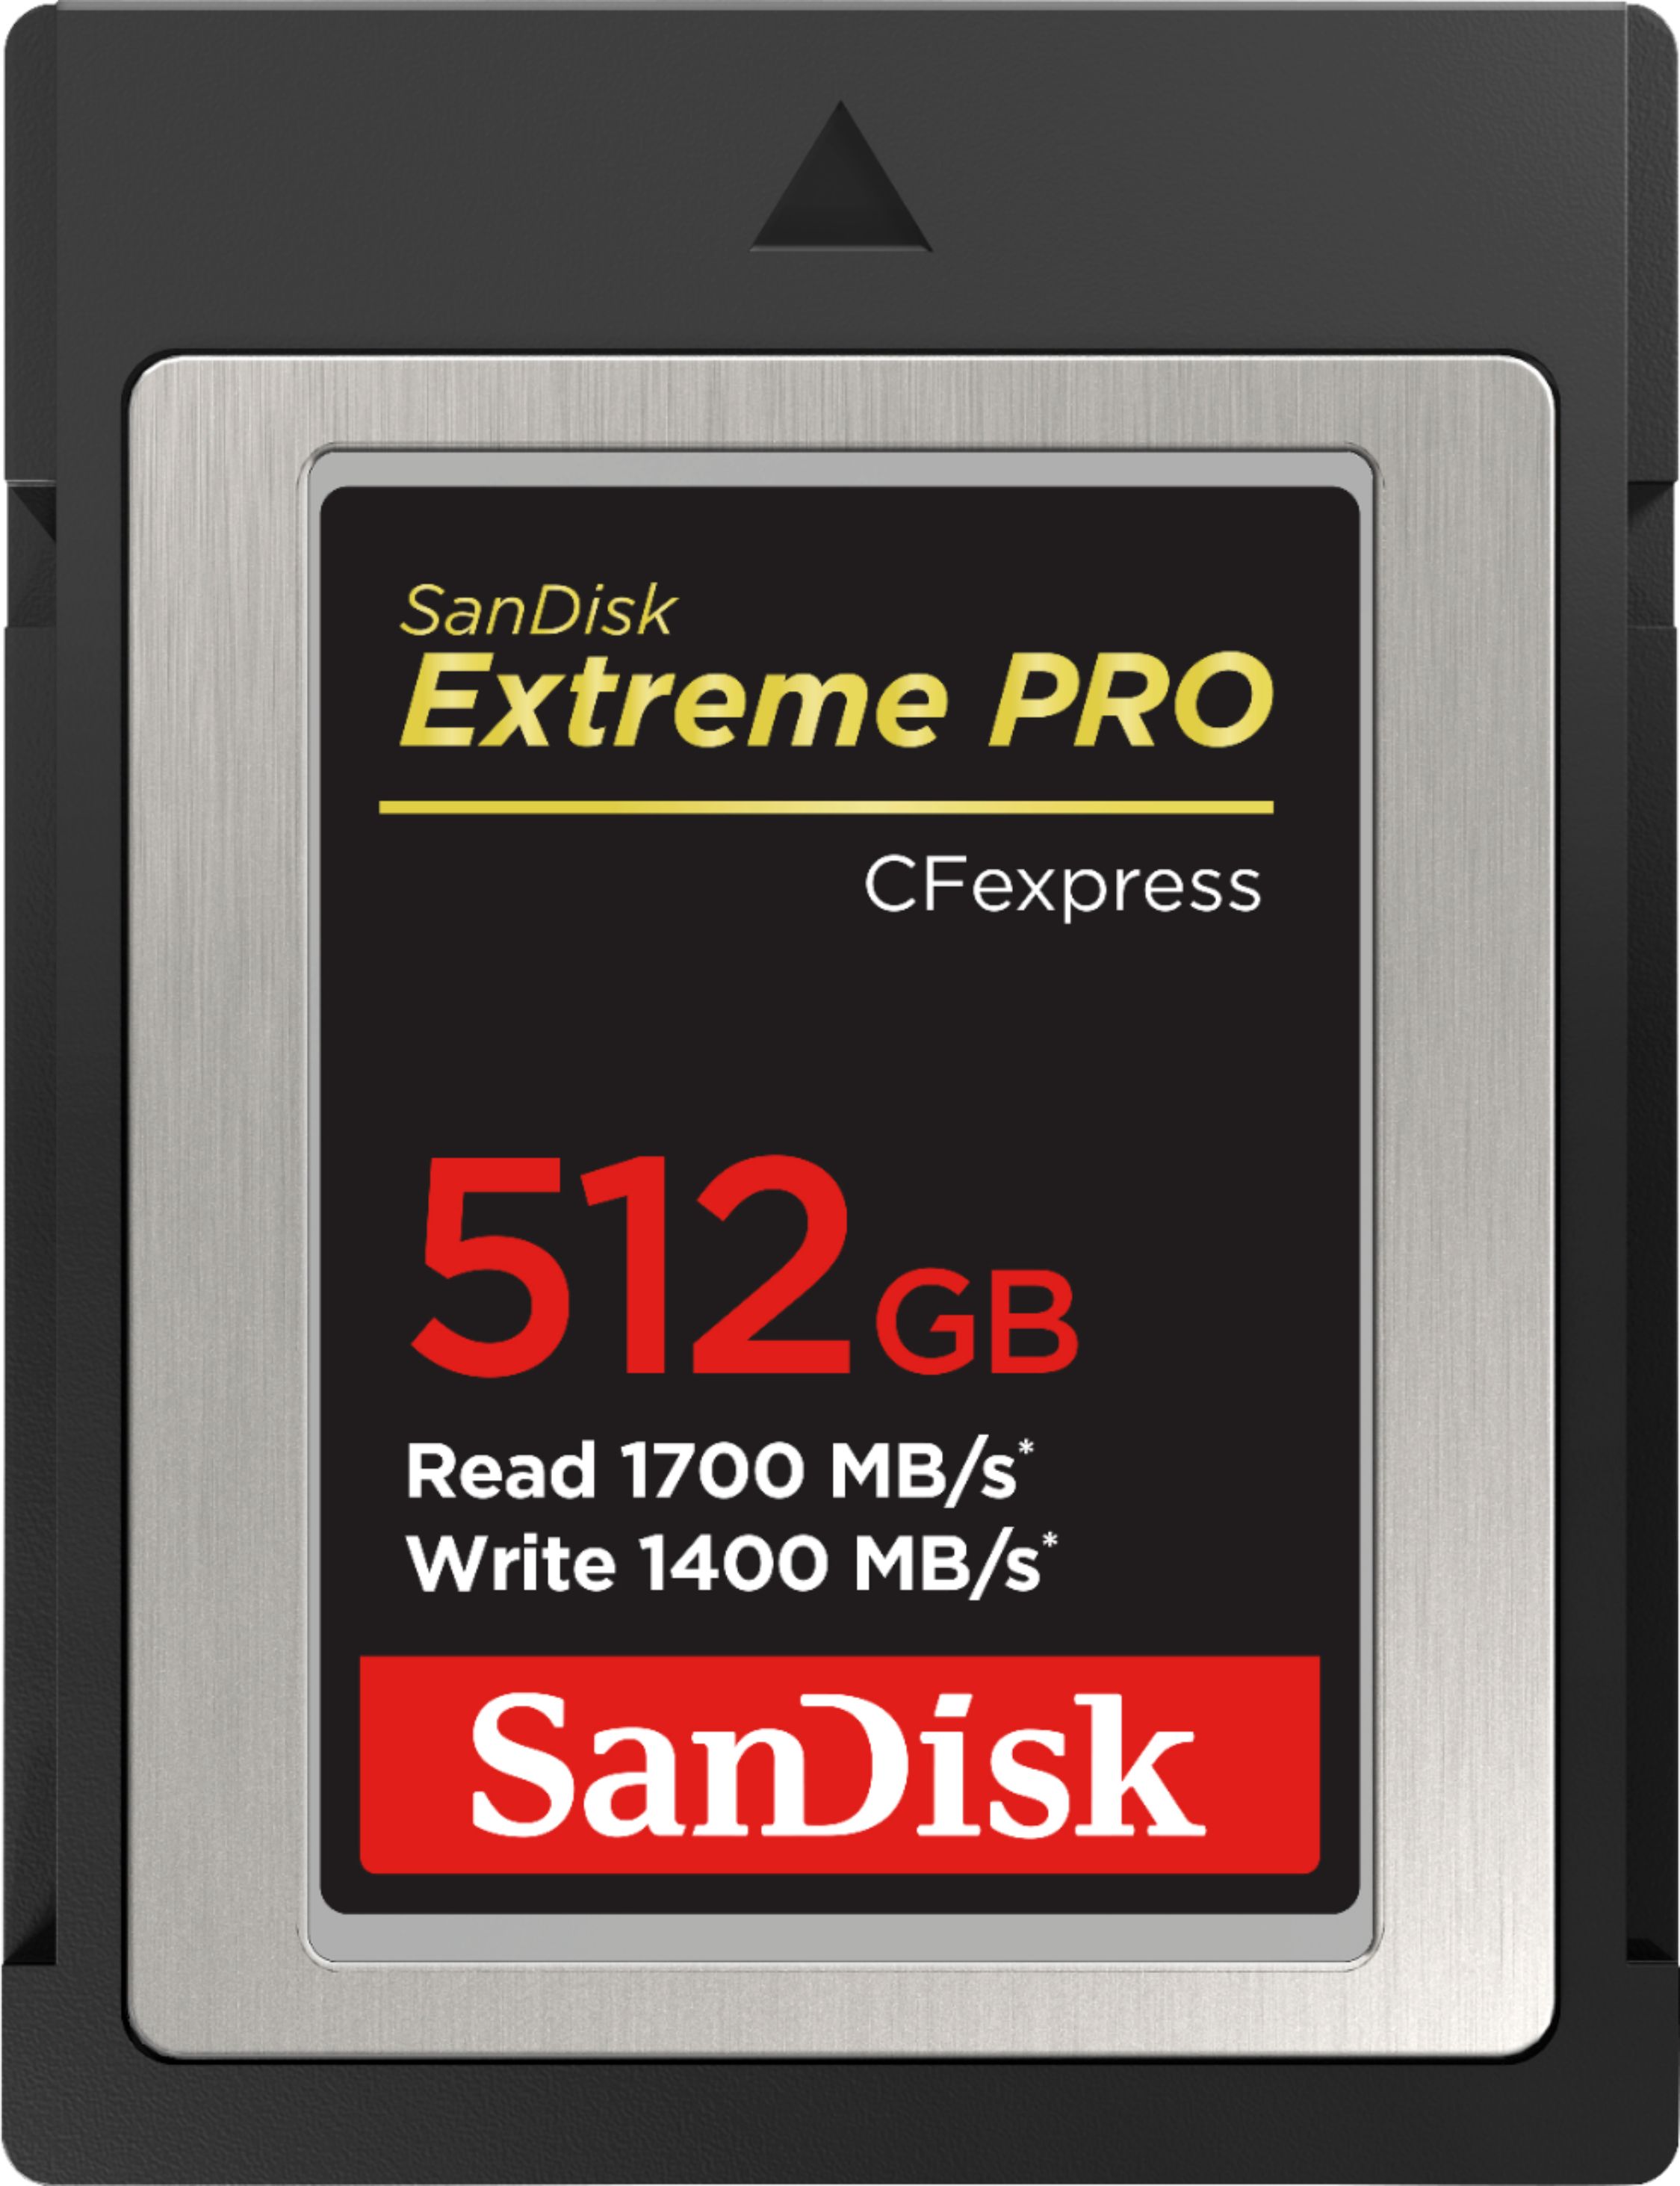 SanDisk 512GB Extreme PRO CFexpress Memory Card SDCFE-512G-ANCNN - Best Buy